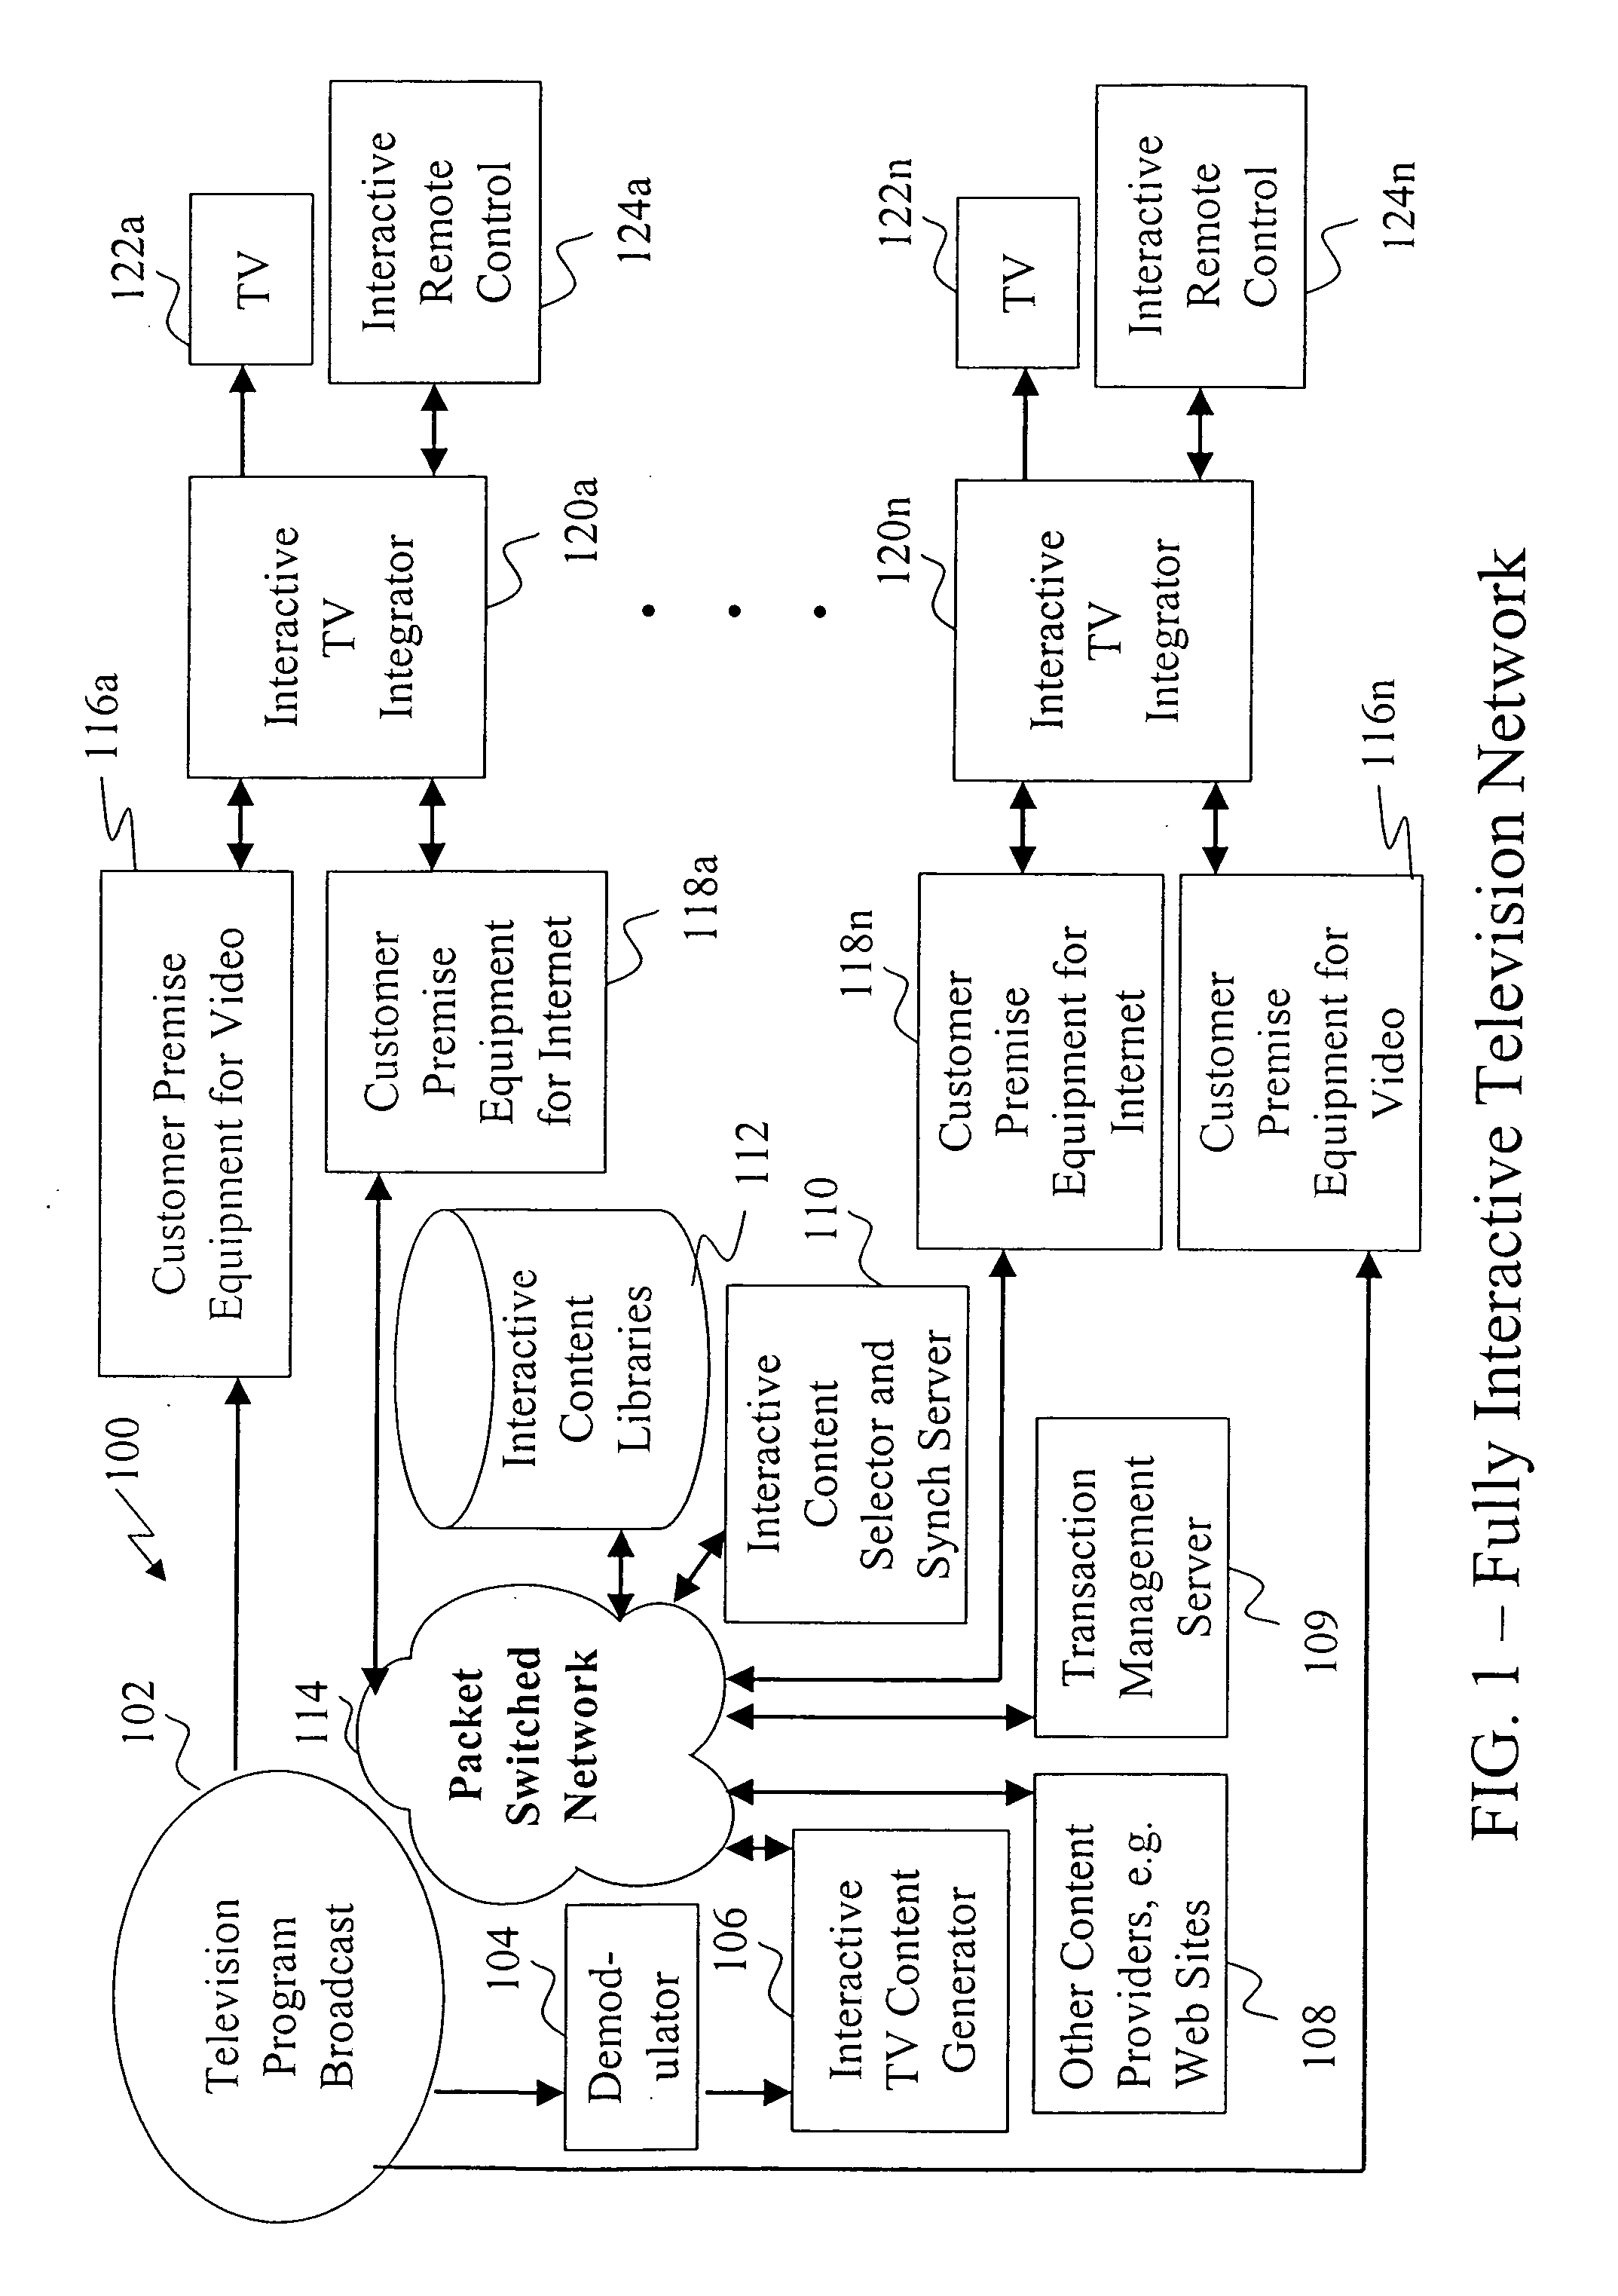 System and method for integration and synchronization of interactive content with television content